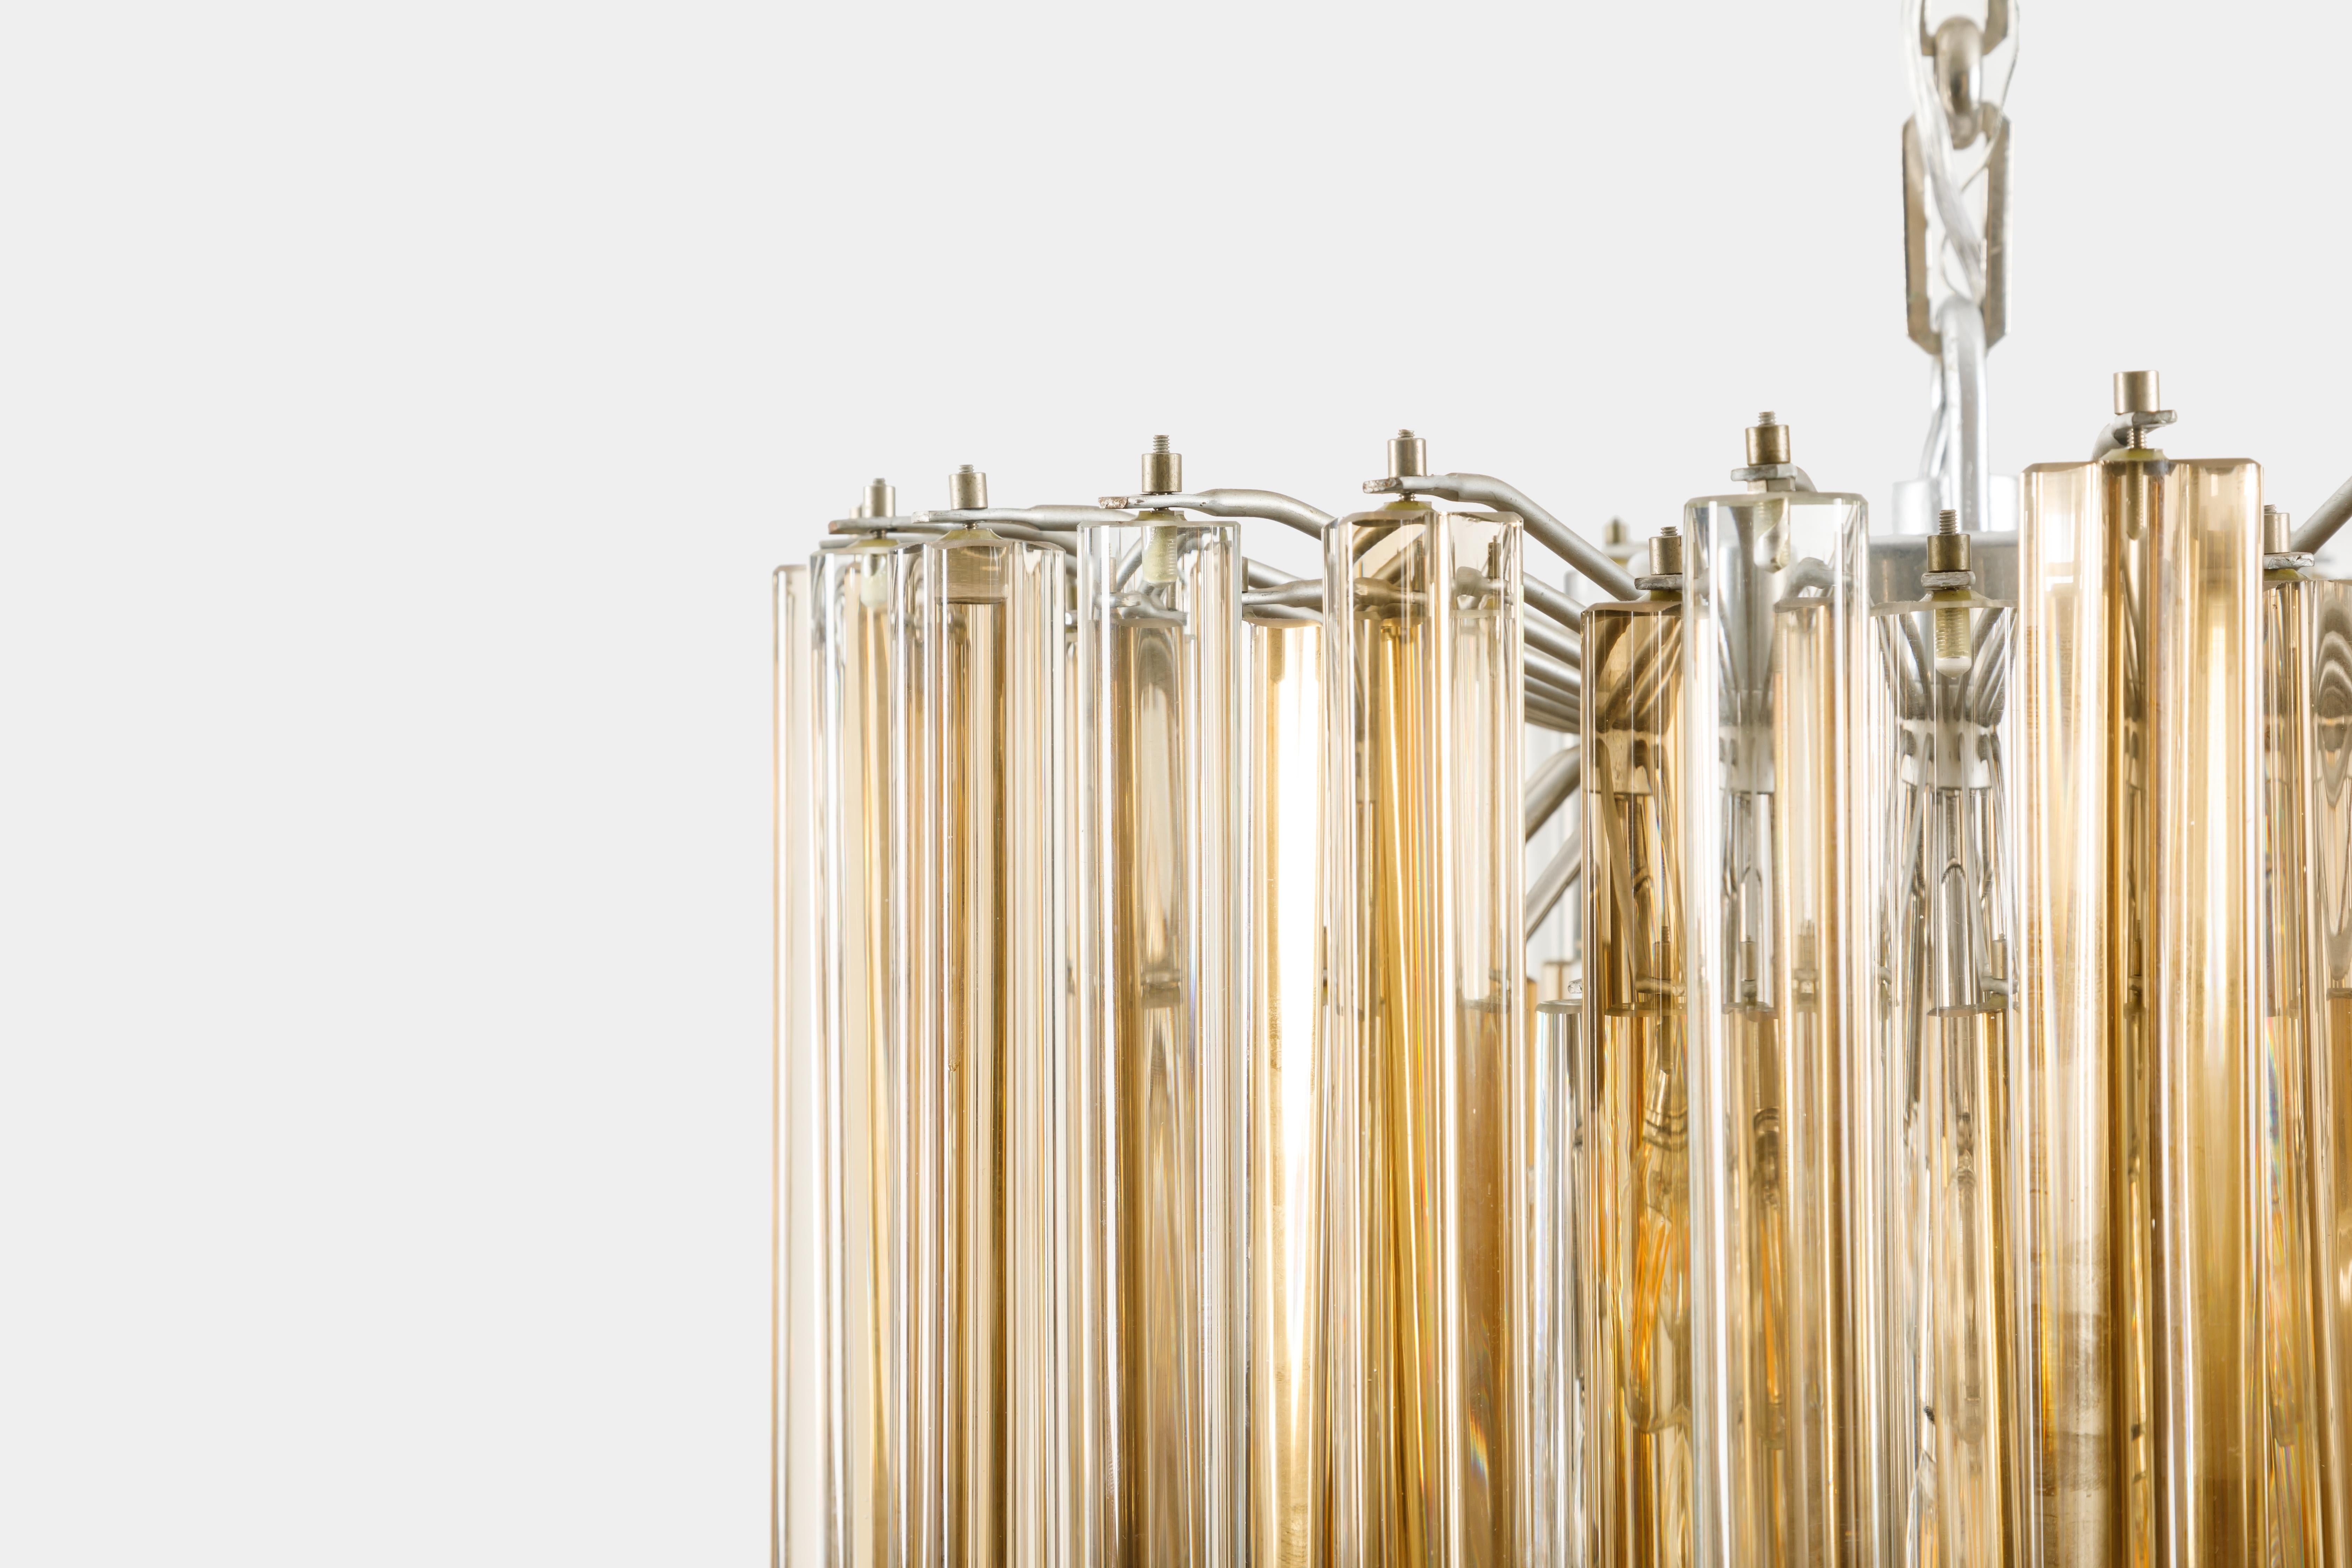 Polished 1960s Venini Chandelier from Trilobo Series For Sale